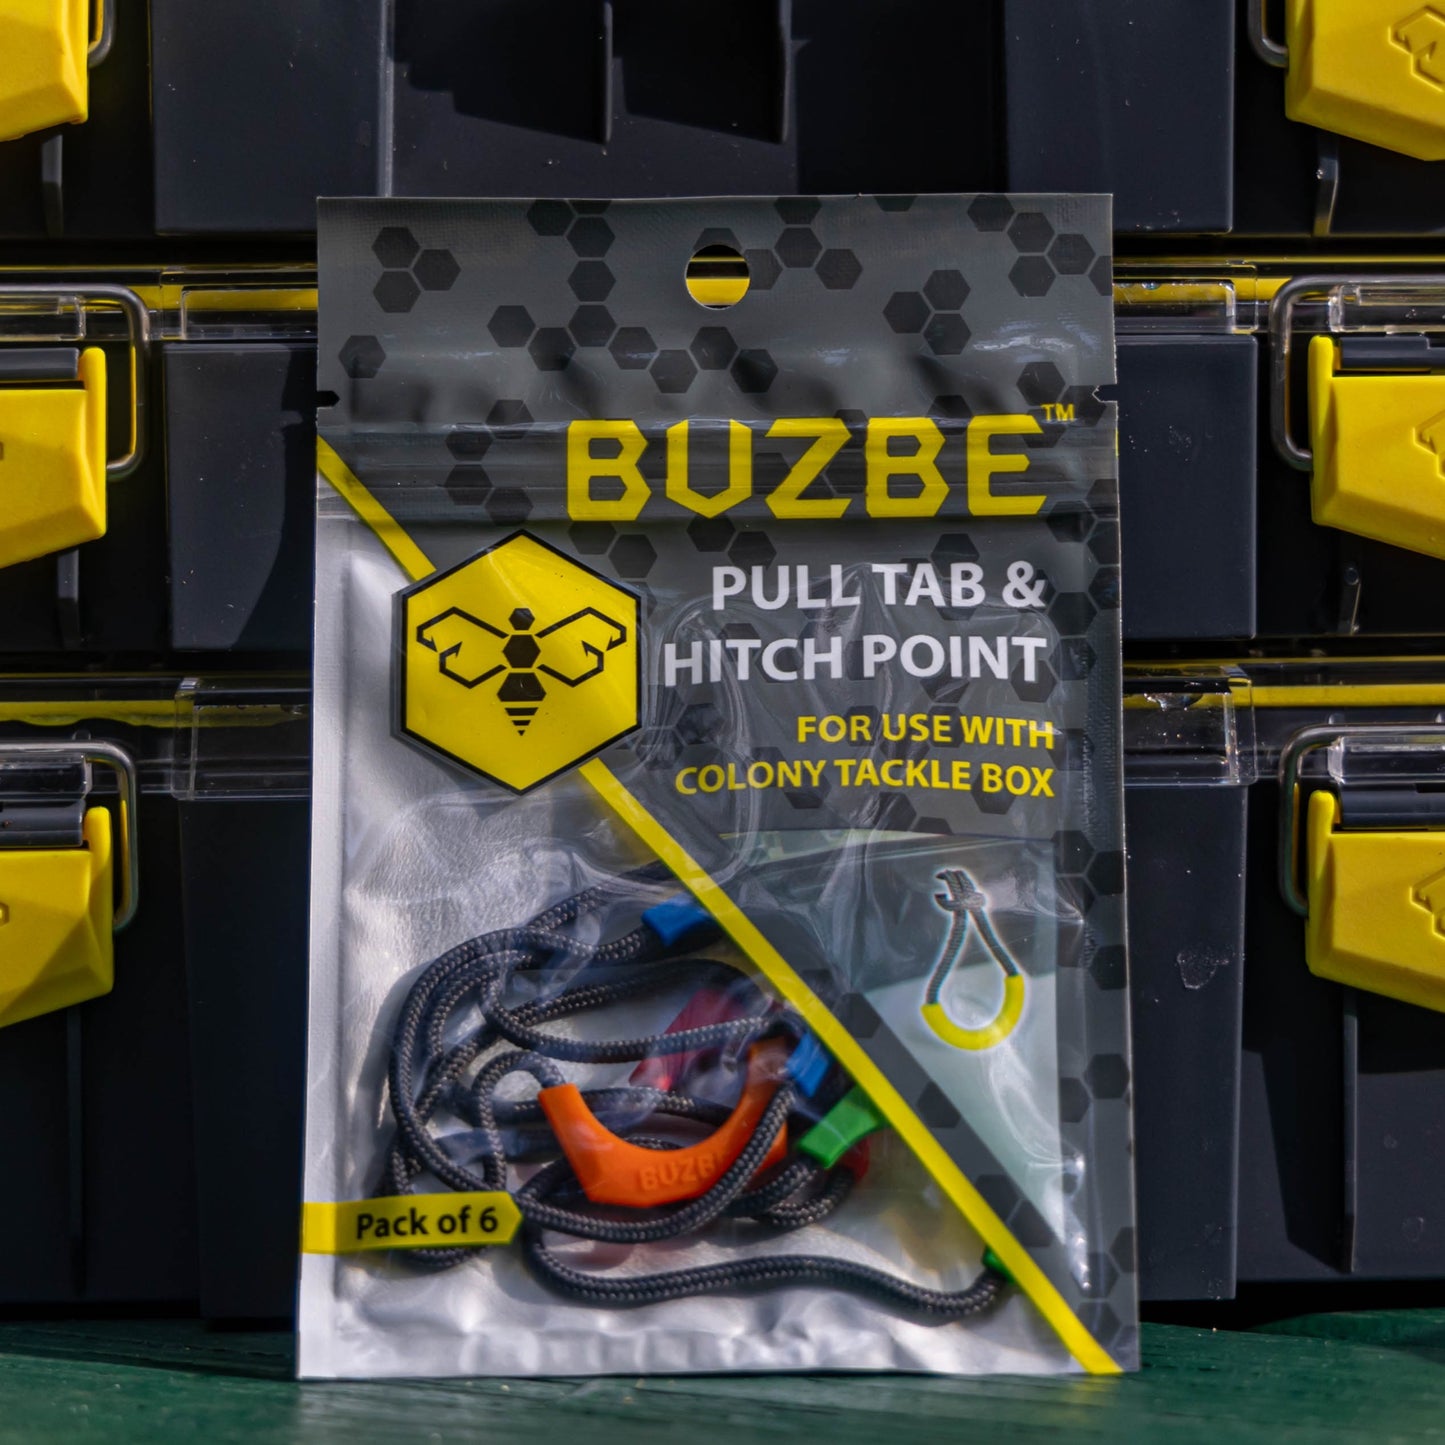 Pull Tab & Hitch Point - Pack of 6 - COLOR RUSH